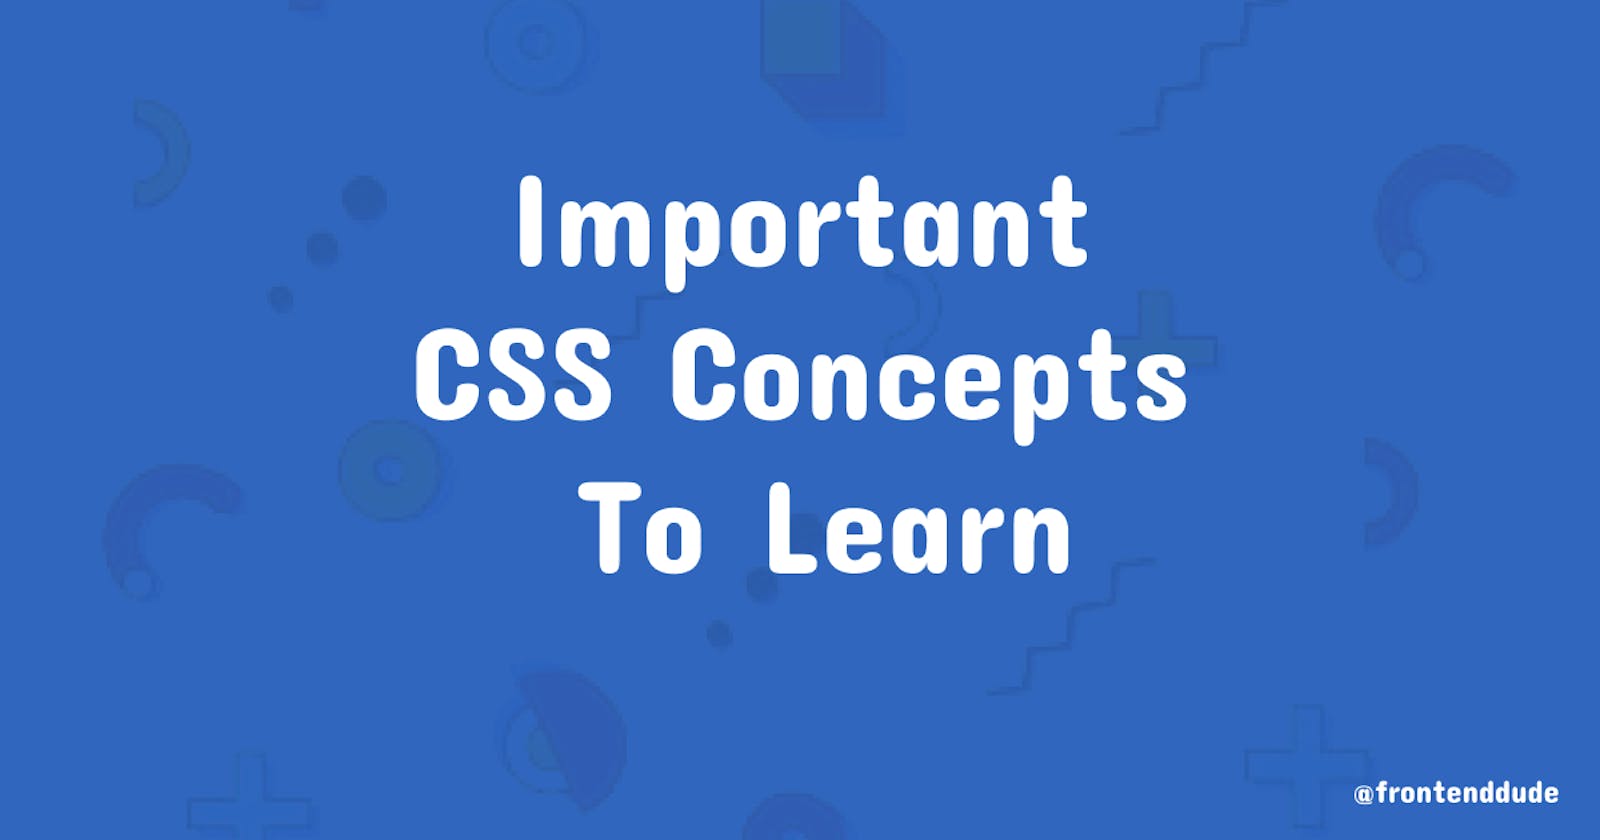 Important CSS Concepts To Learn